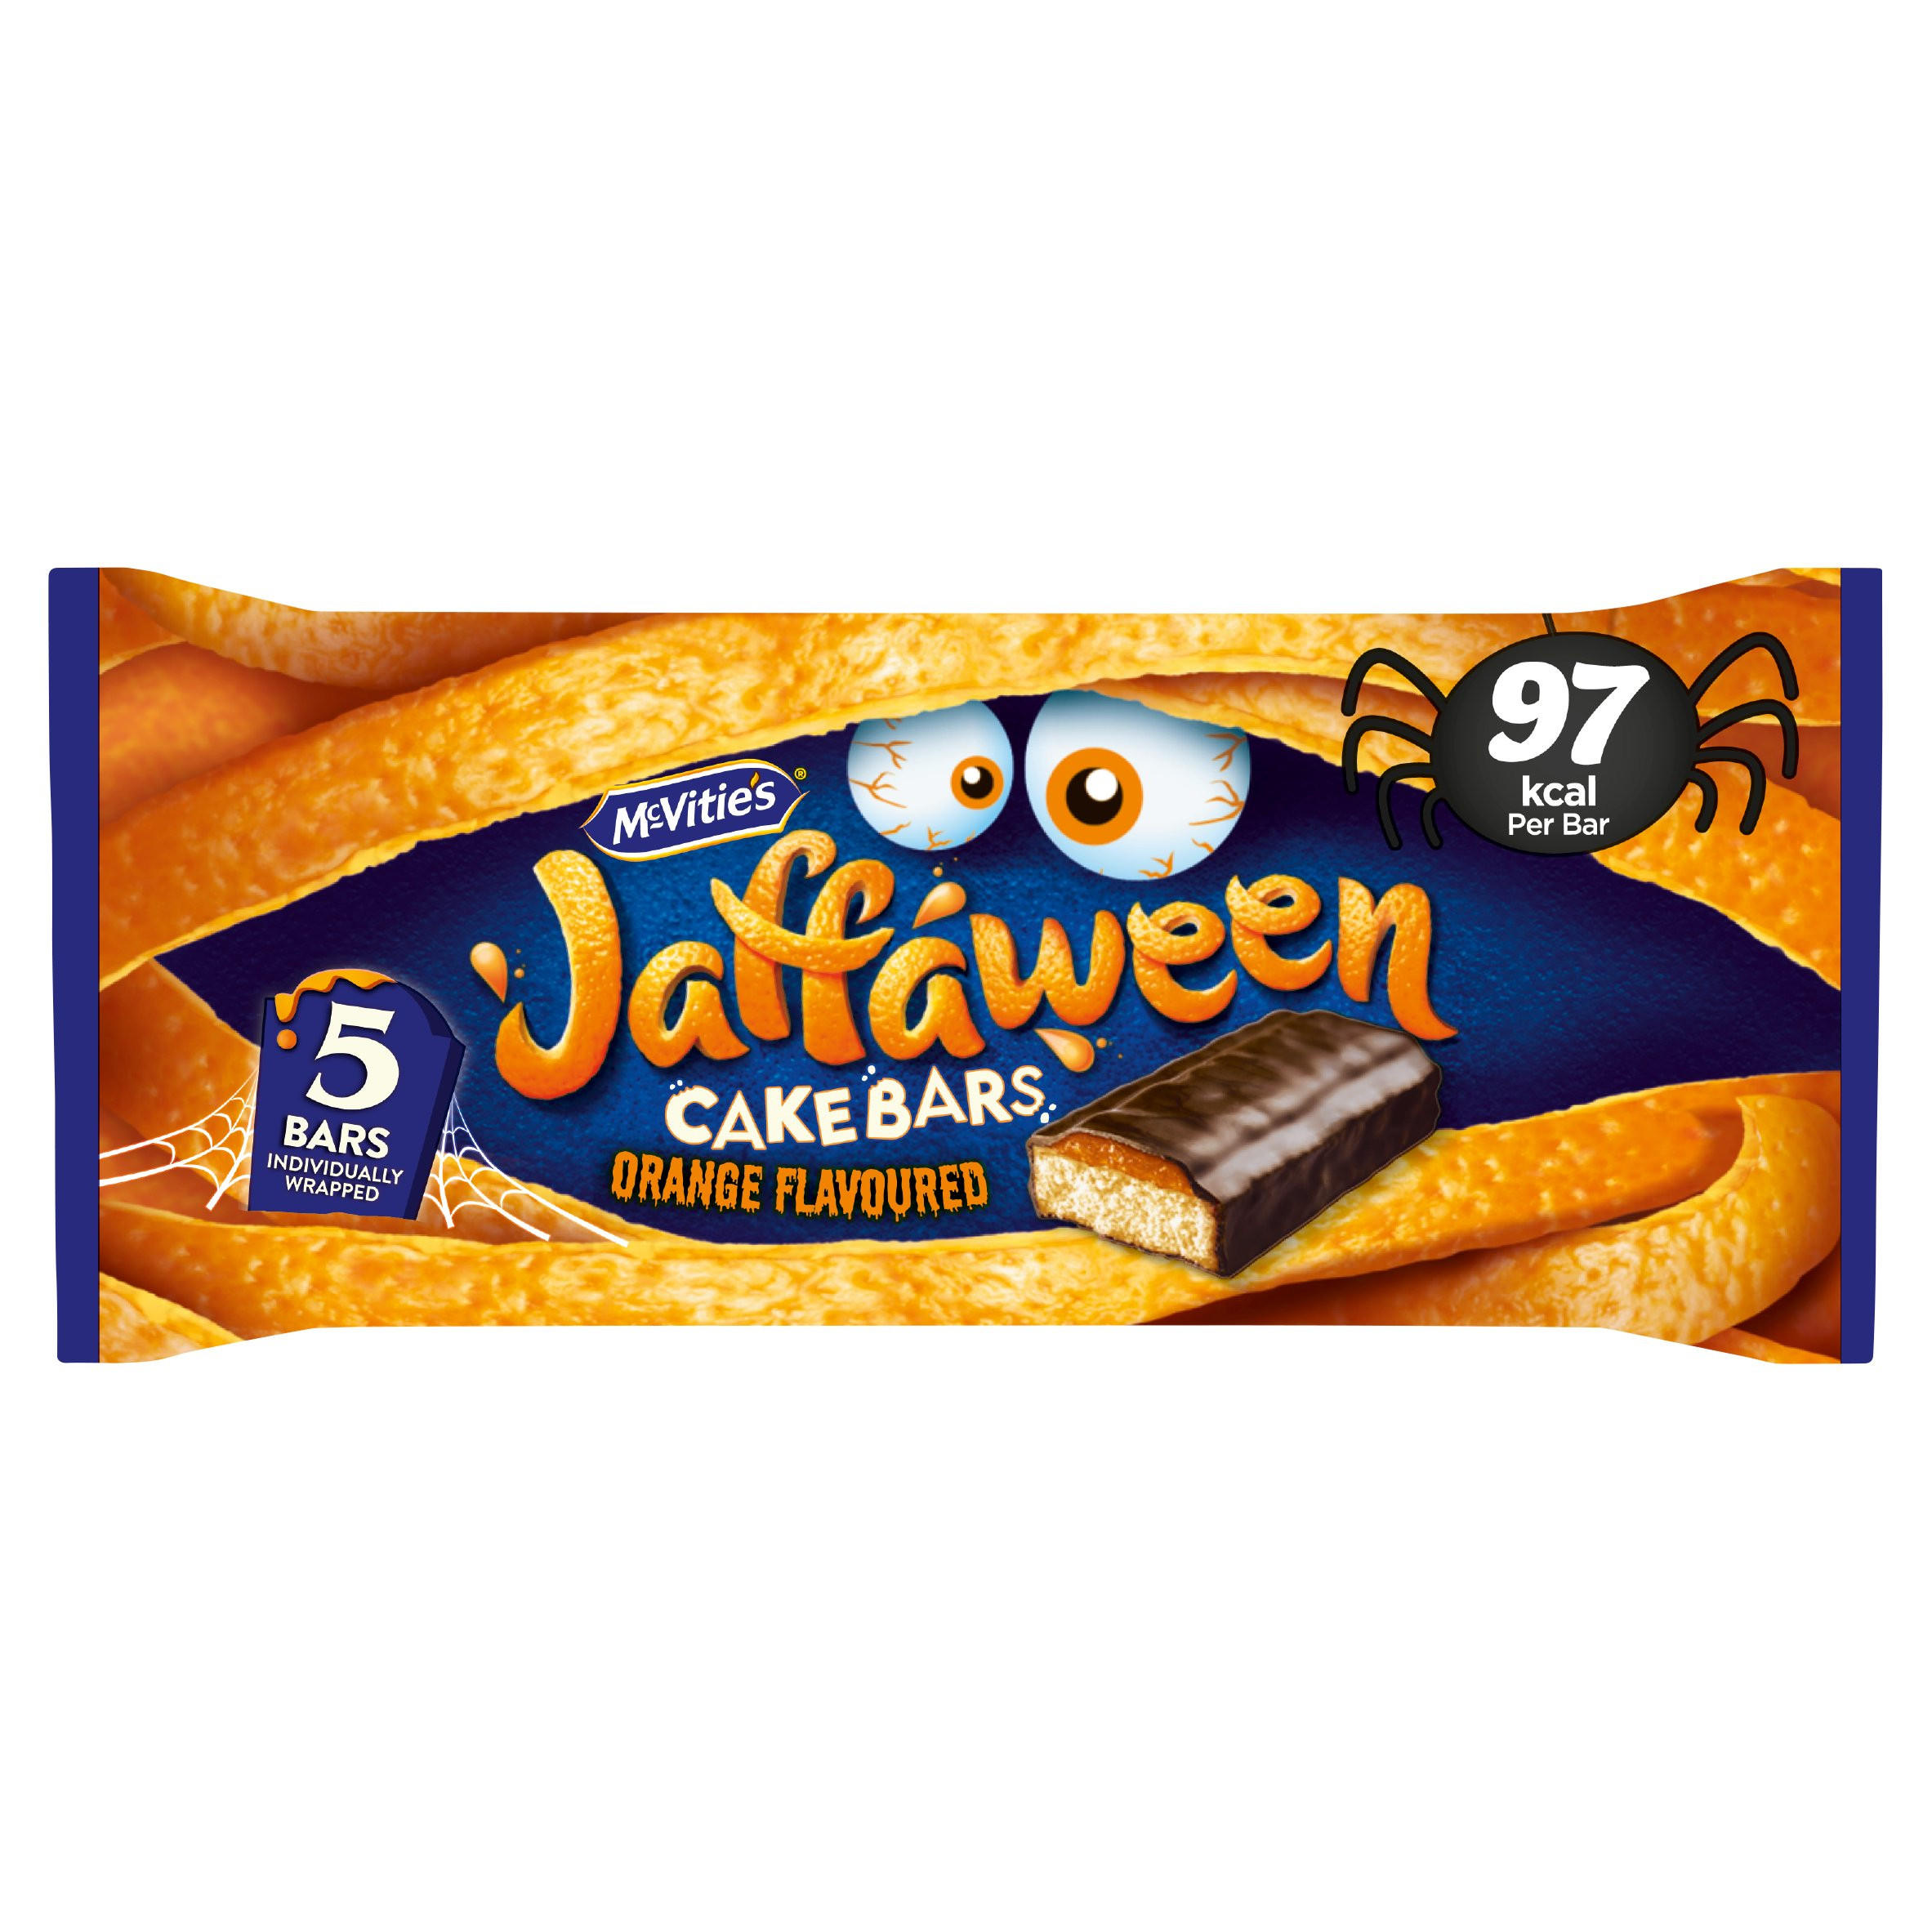 McVities Jaffaween Cake Bars 5 Pack (Dec 23) RRP £1.95 CLEARANCE XL 89p or 2 for £1.50